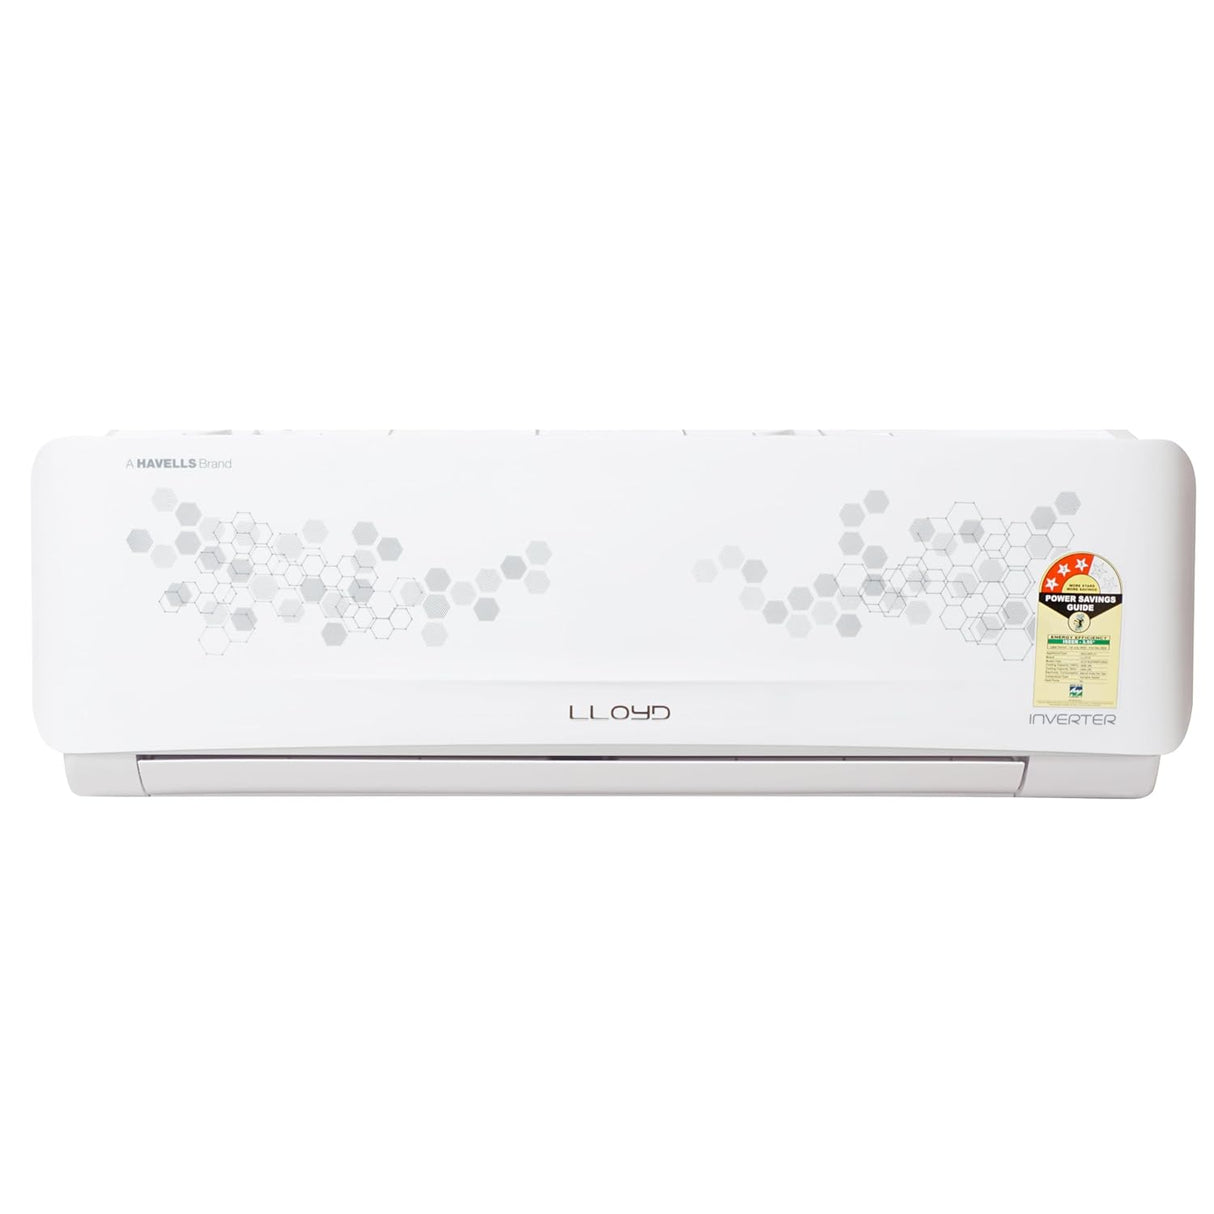 Lloyd 1.5 Ton 3 Star 5 in 1 Convertible Inverter Split AC with Anti-Viral + PM 2.5 Filter,  (GLS18I3GWSPC, 100% Copper, Filter Indication